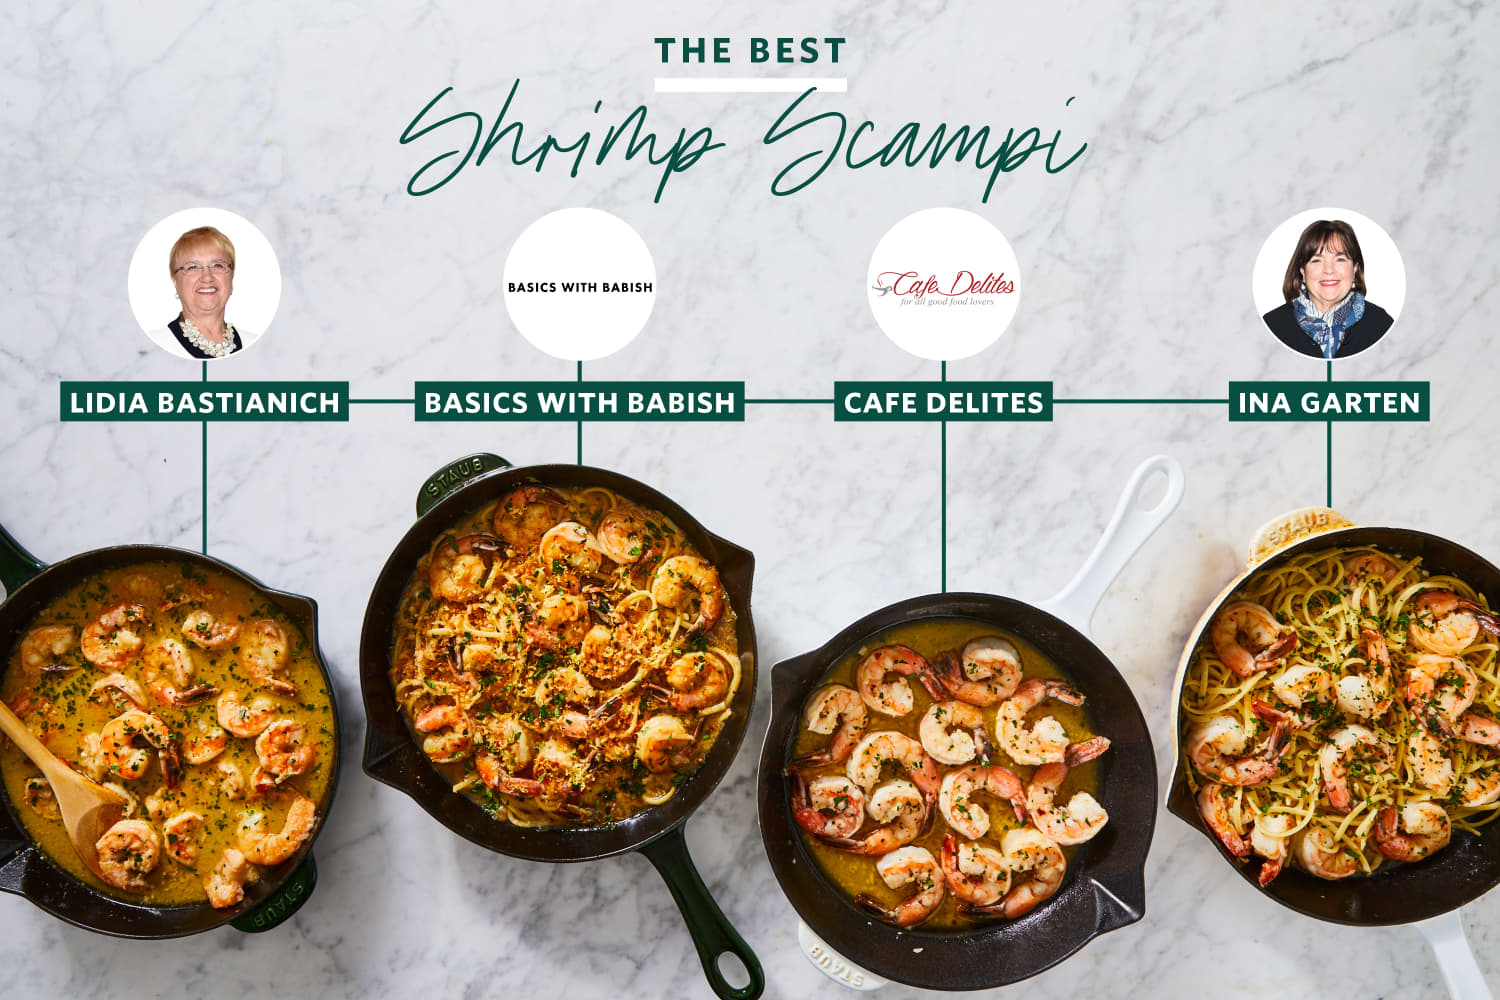 I Tried 4 Popular Shrimp Scampi Recipes and the Winner Was Buttery, Garlicky Perfection